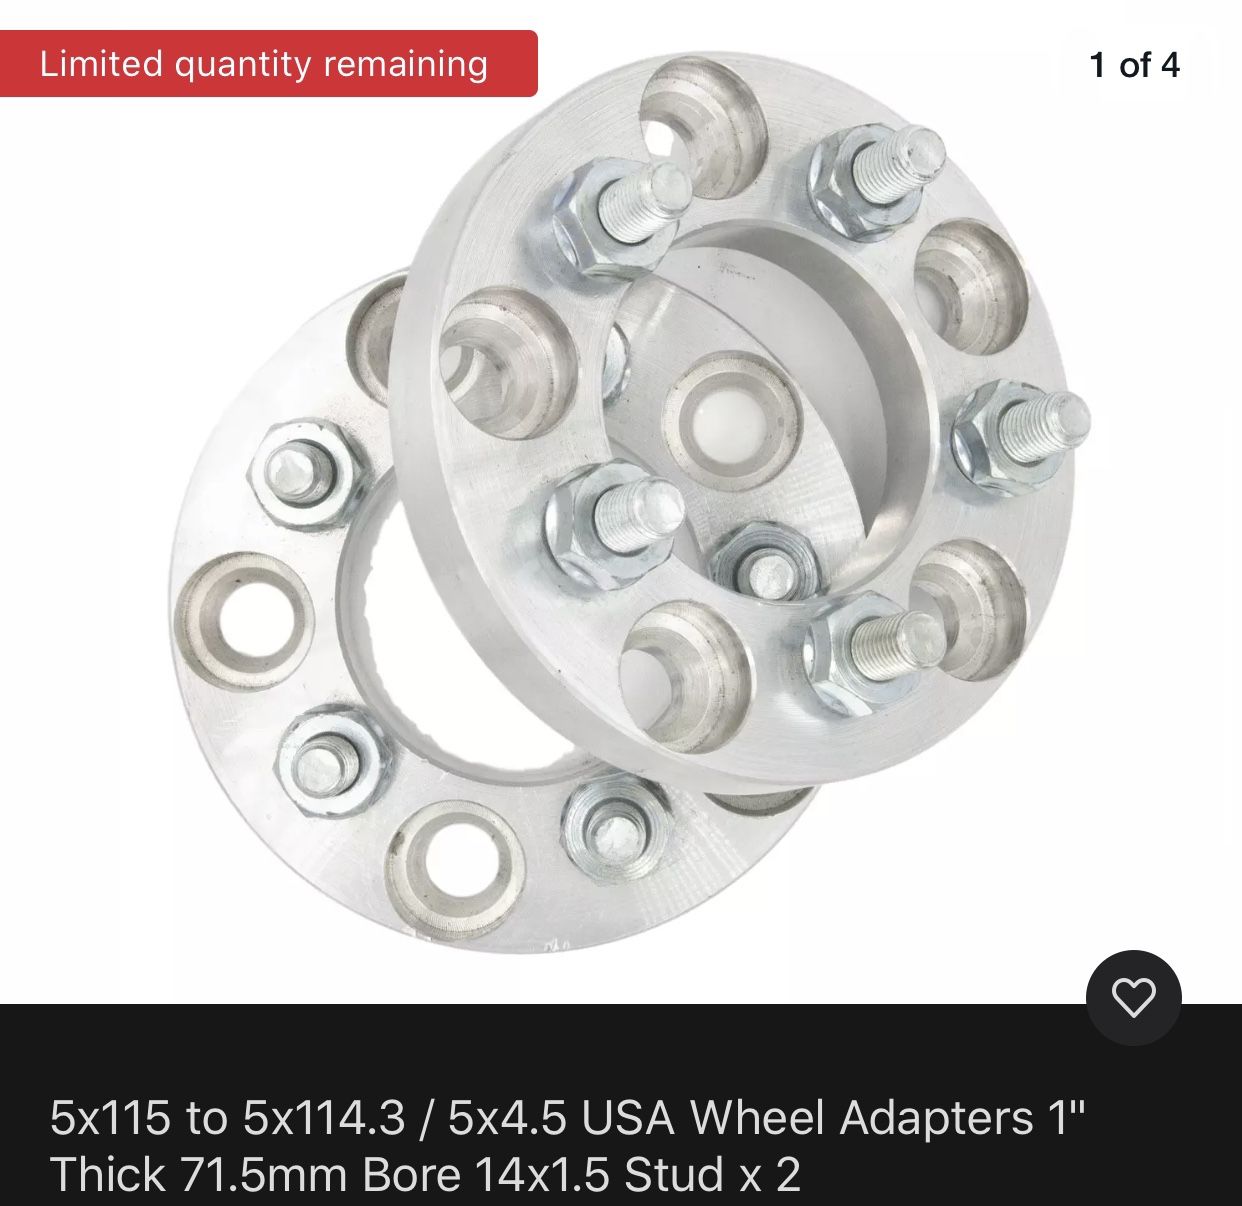 5x115 x 5x114.3 wheel adapters . Never used !